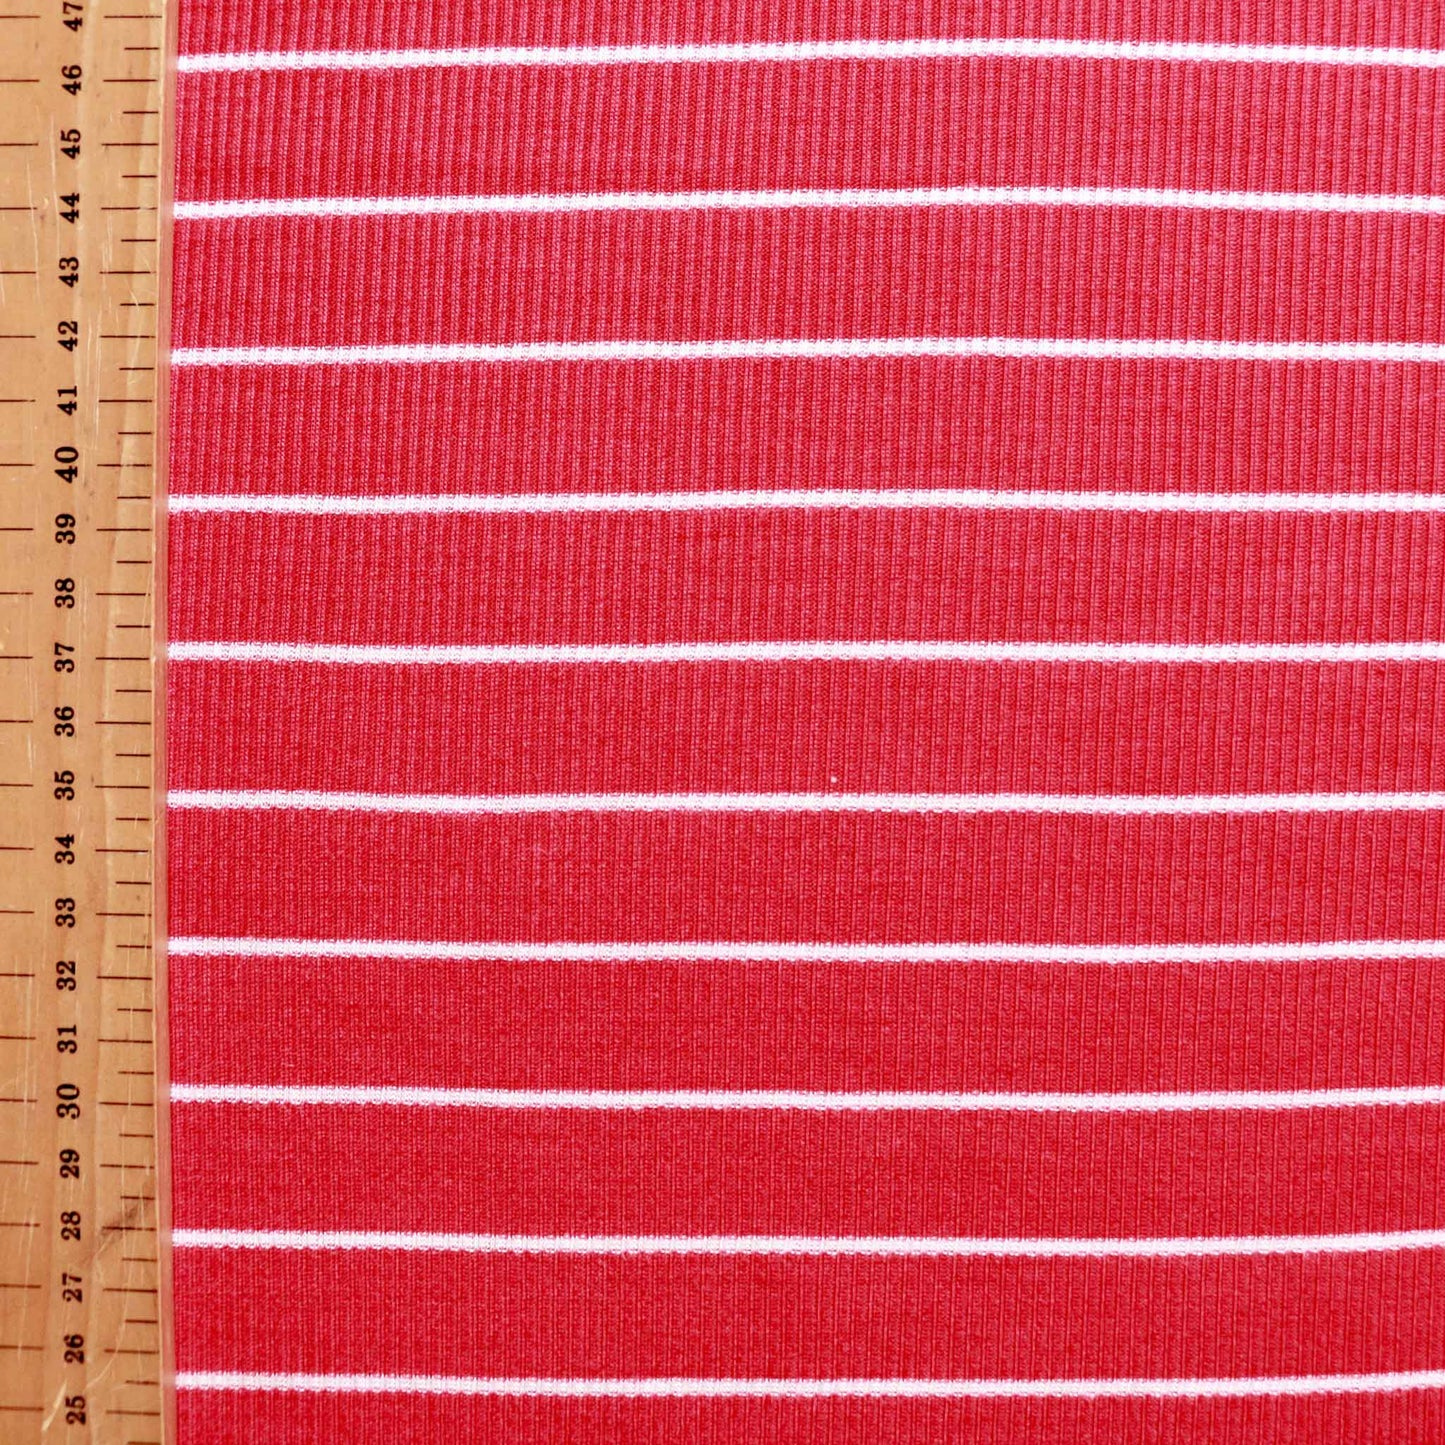 rib jersey knit stretchy viscose dressmaking fabric in red and white stripe